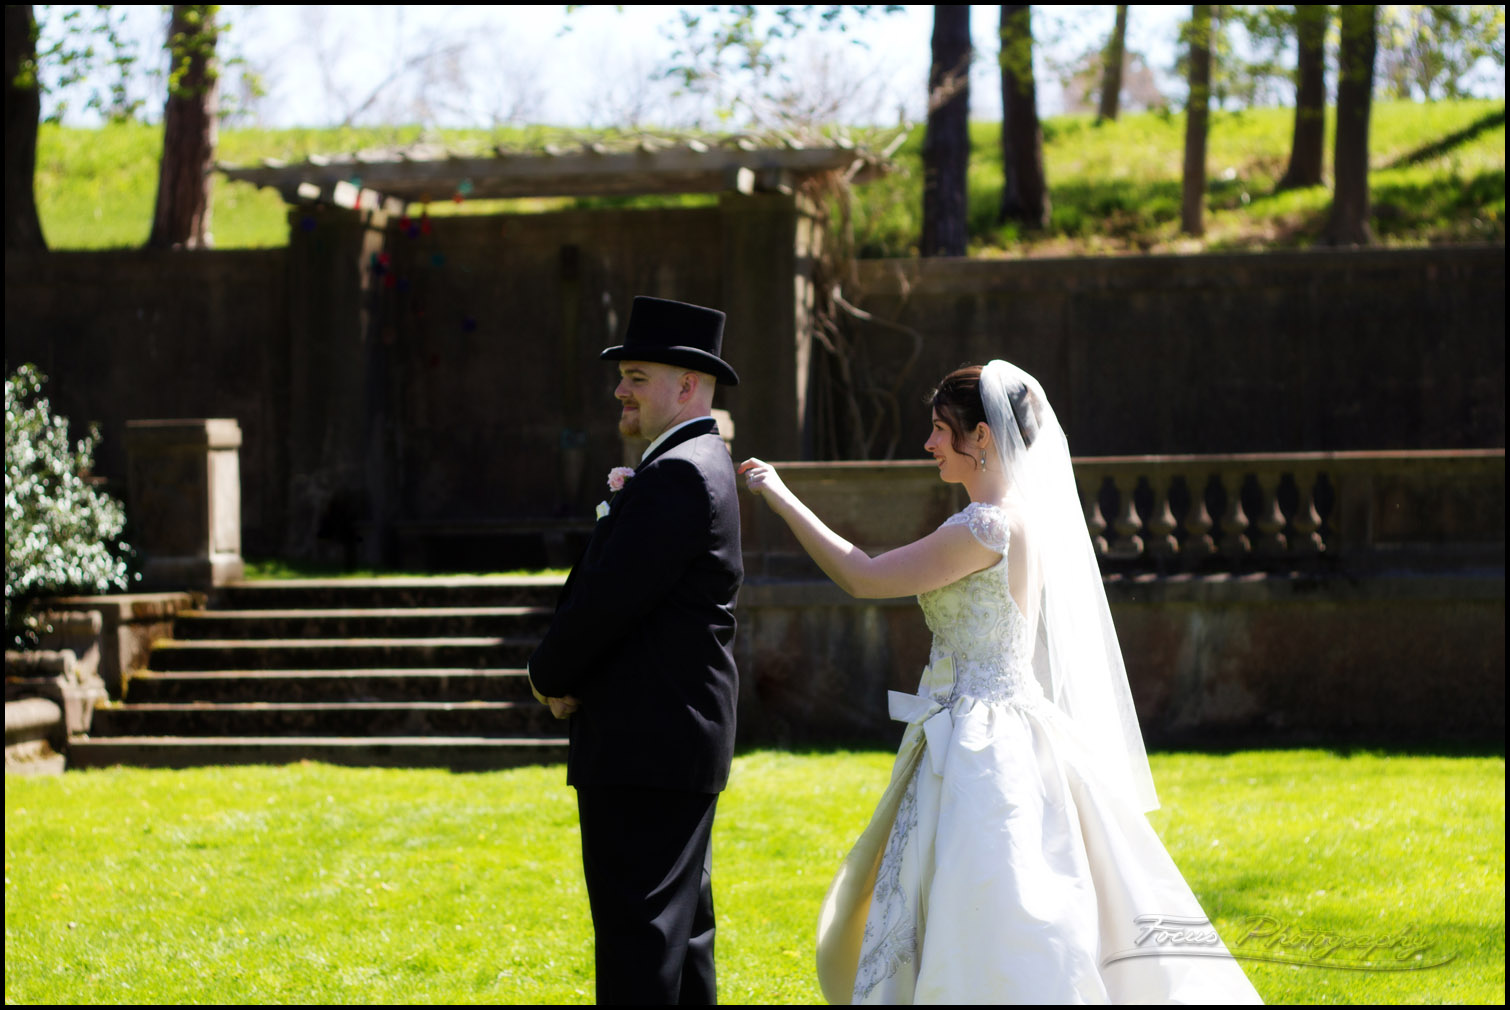 bride taps groom's shoulder during first glance reveal for wedding photography in Italian gardens